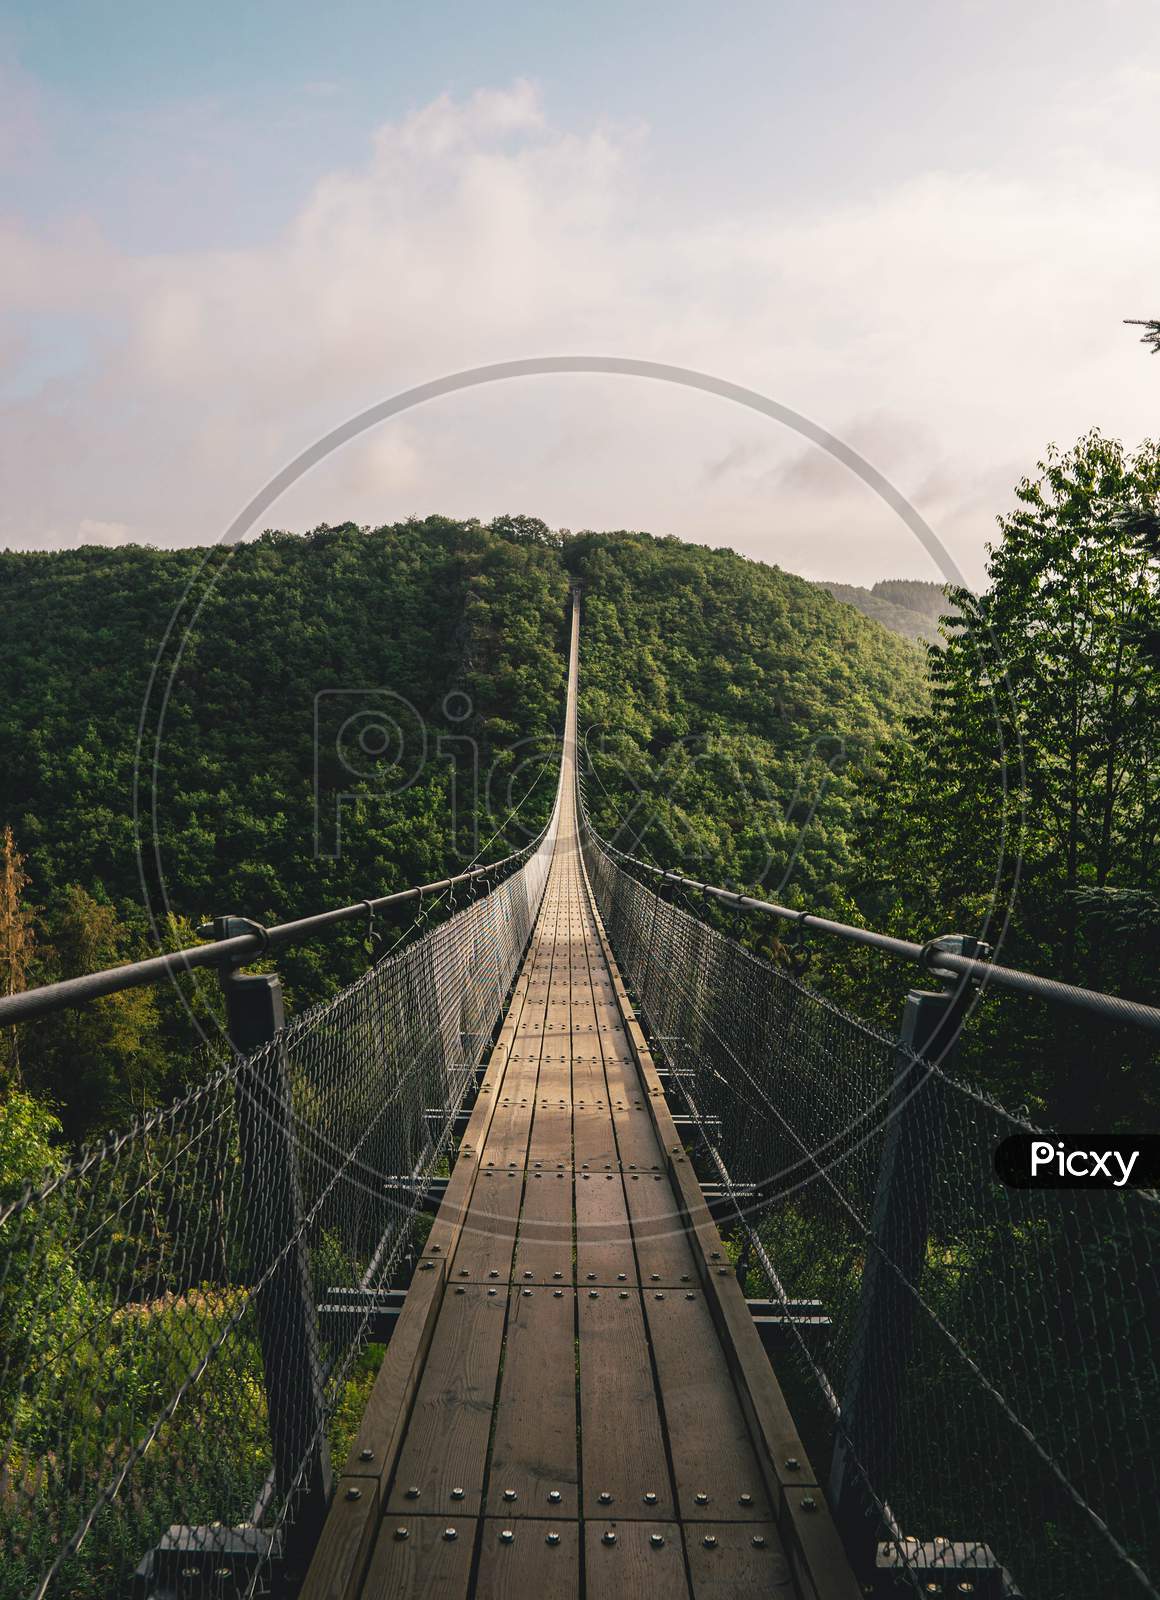 Brown wooden Hanging bridge in the evergreen tropical forest over top of trees for adventure walking and sightseeing surrounded by green forest trees.